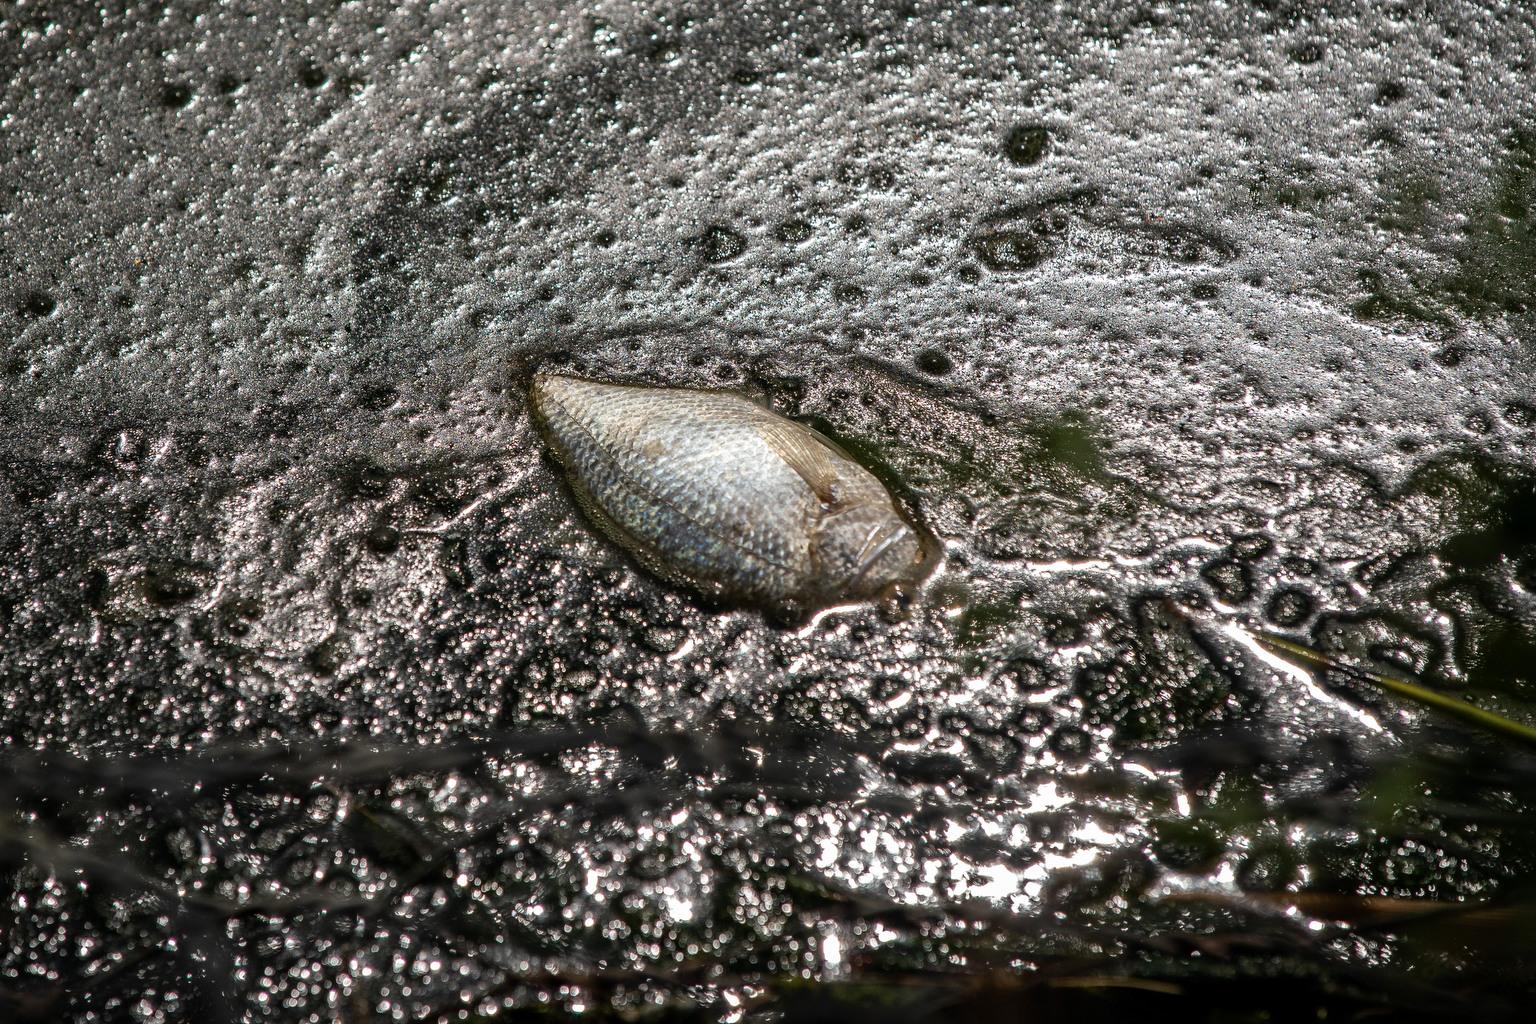 A dead fish floats in the water of Sloan's Lake.